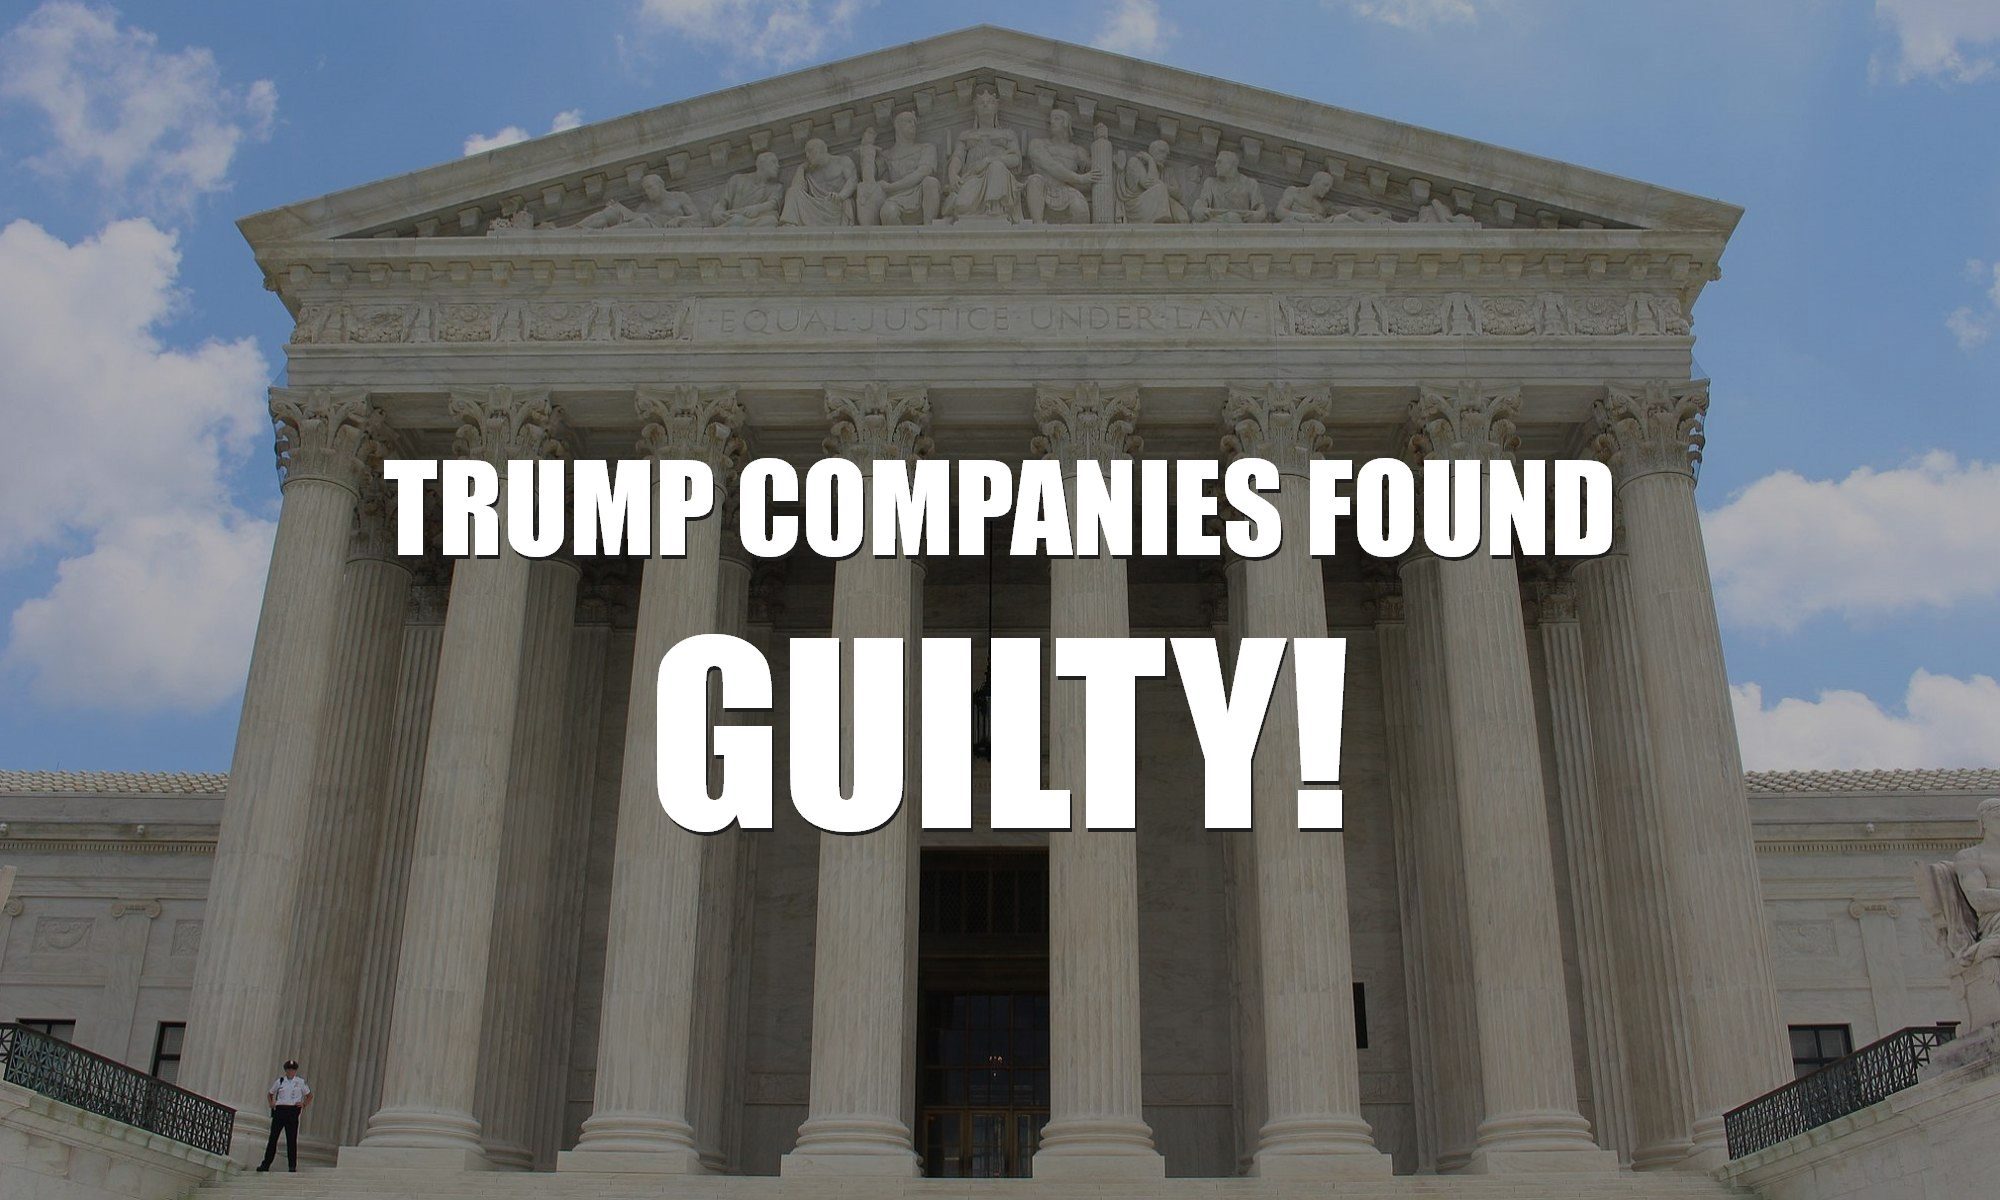 What will happen to the Trump company family business? What will happen to Trump as a result of the family business guilty verdict?